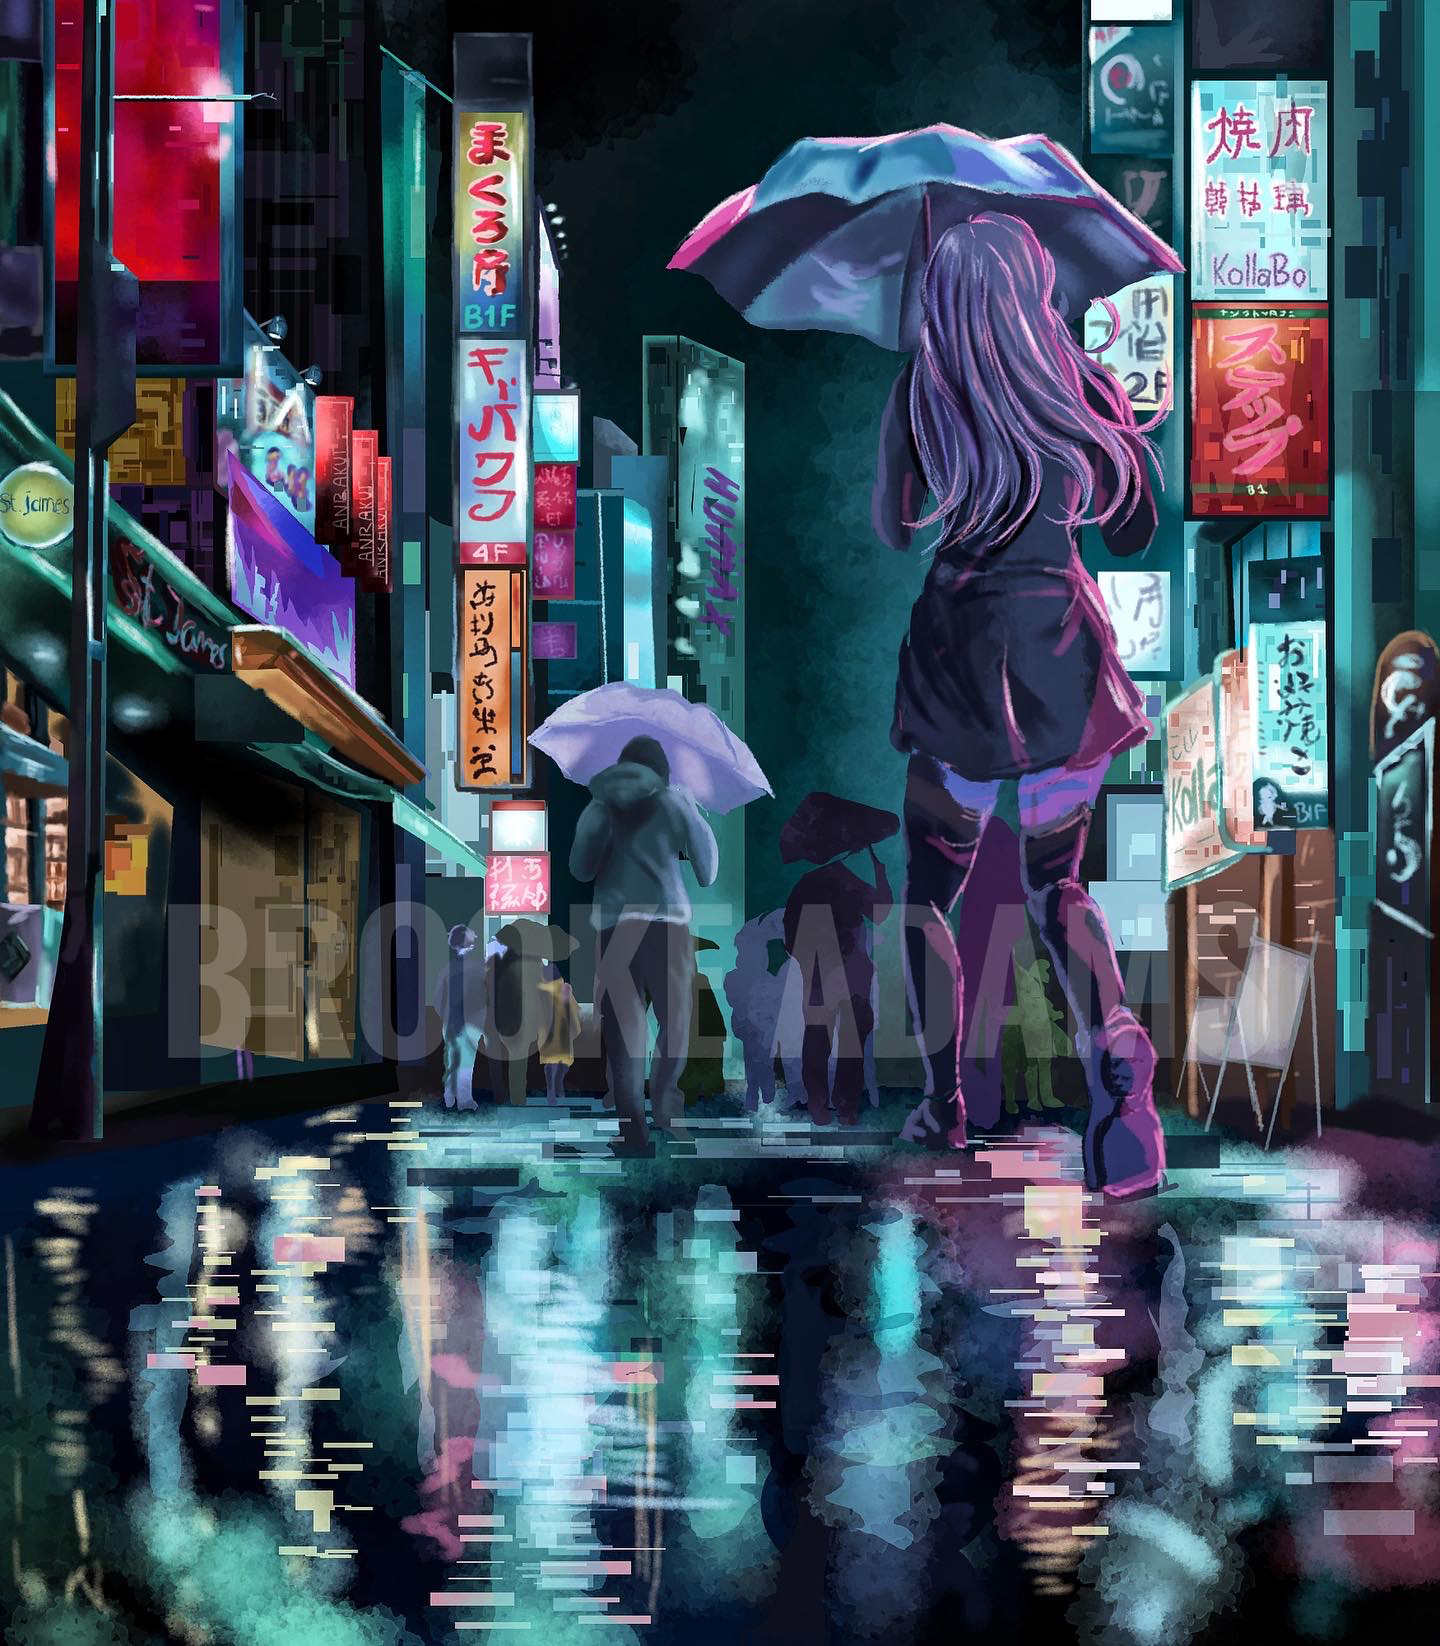 Drawing of people in a city on a rainy day